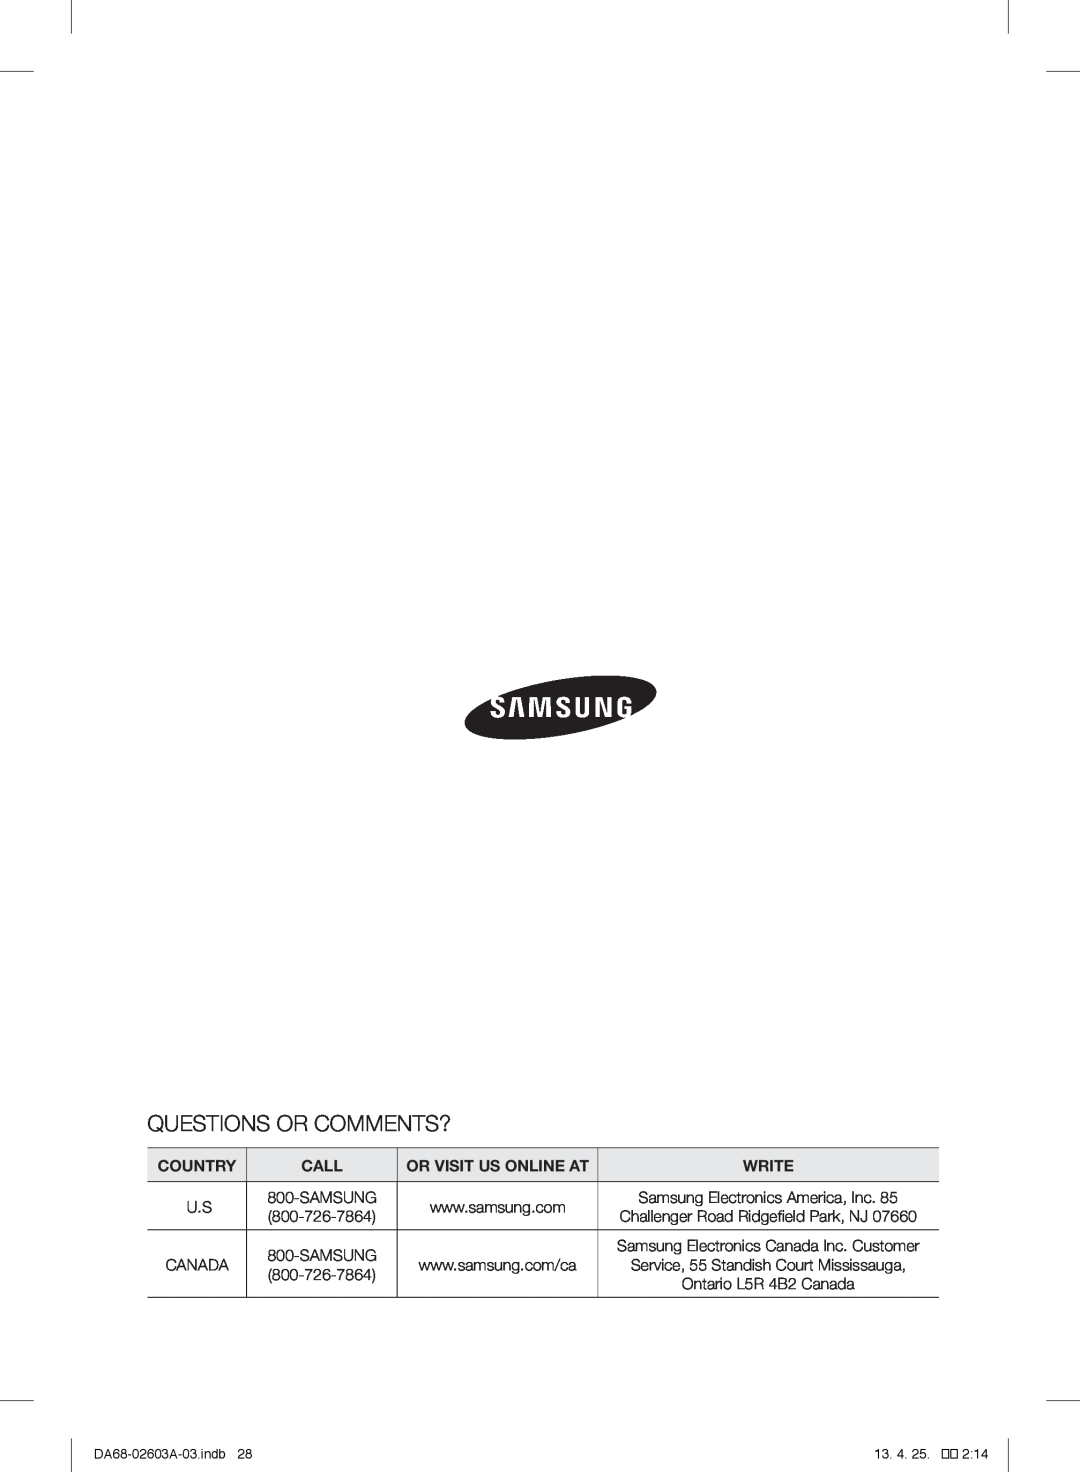 Samsung RF323TEDBBC Questions Or Comments?, Country, Call, Or Visit Us Online At, Write, DA68-02603A-03.indb, 13. 4. 25 